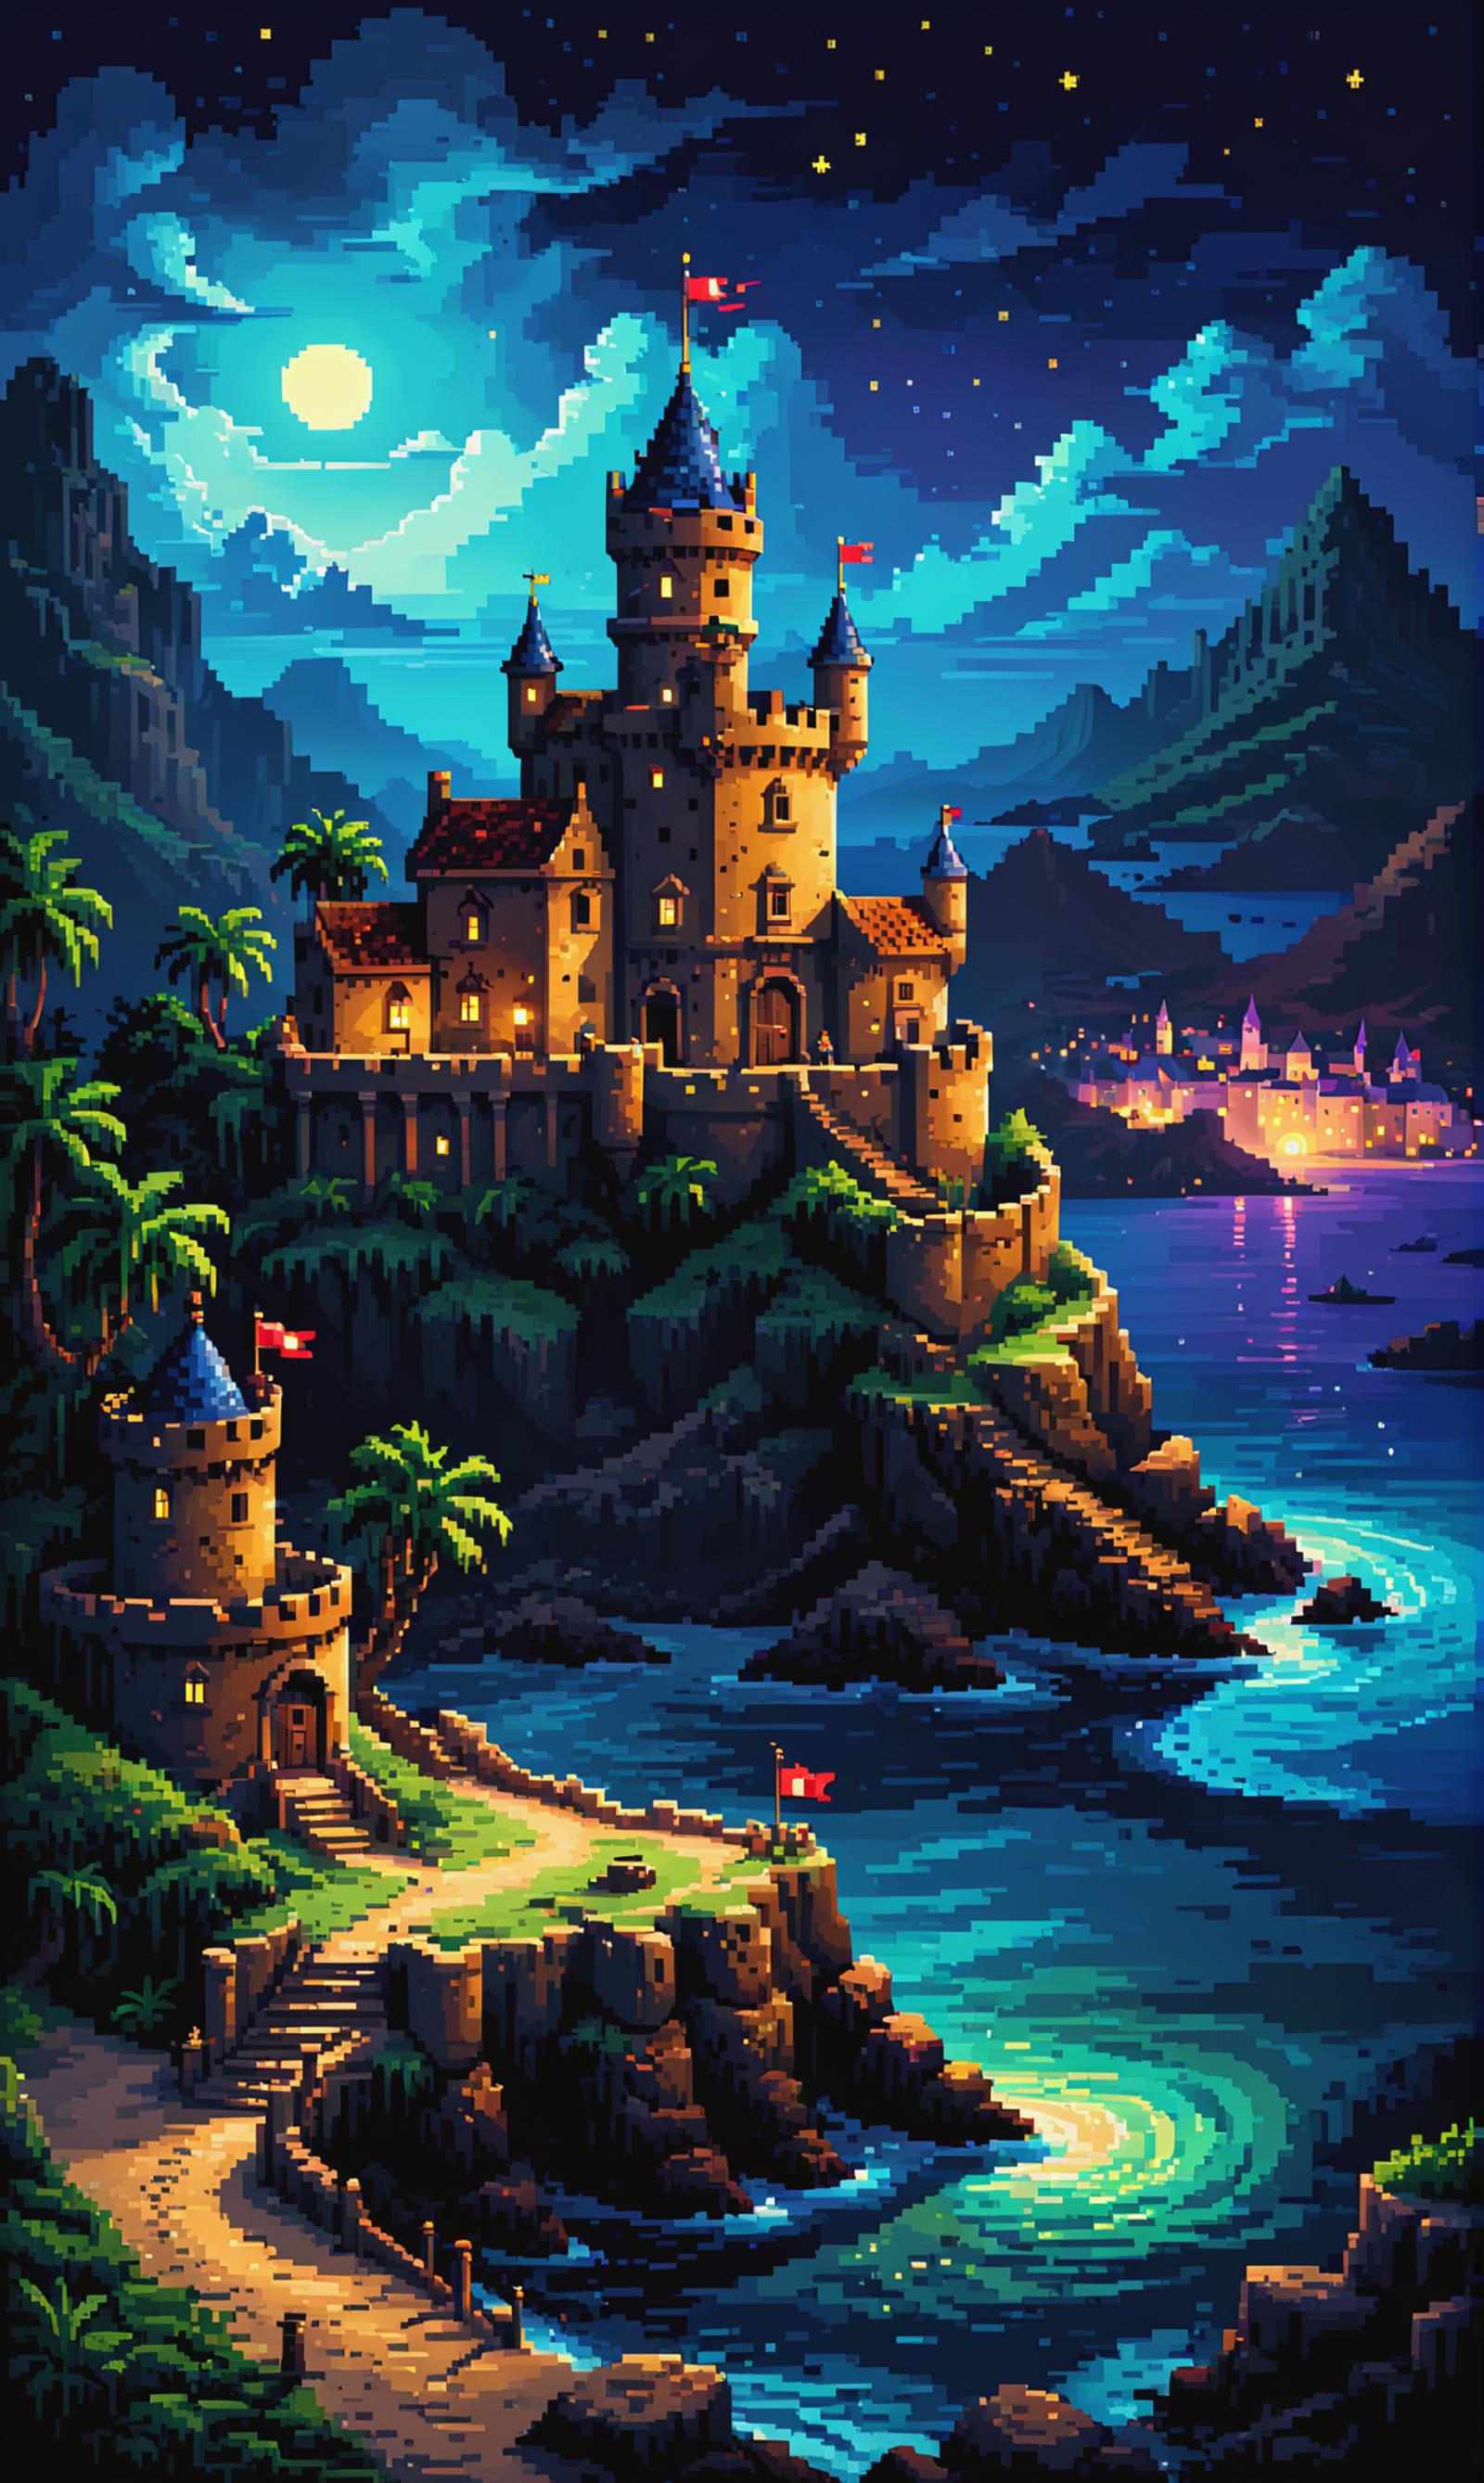 A beautifully drawn illustration of a castle on a mountain side with a blue sky and a body of water in the background.